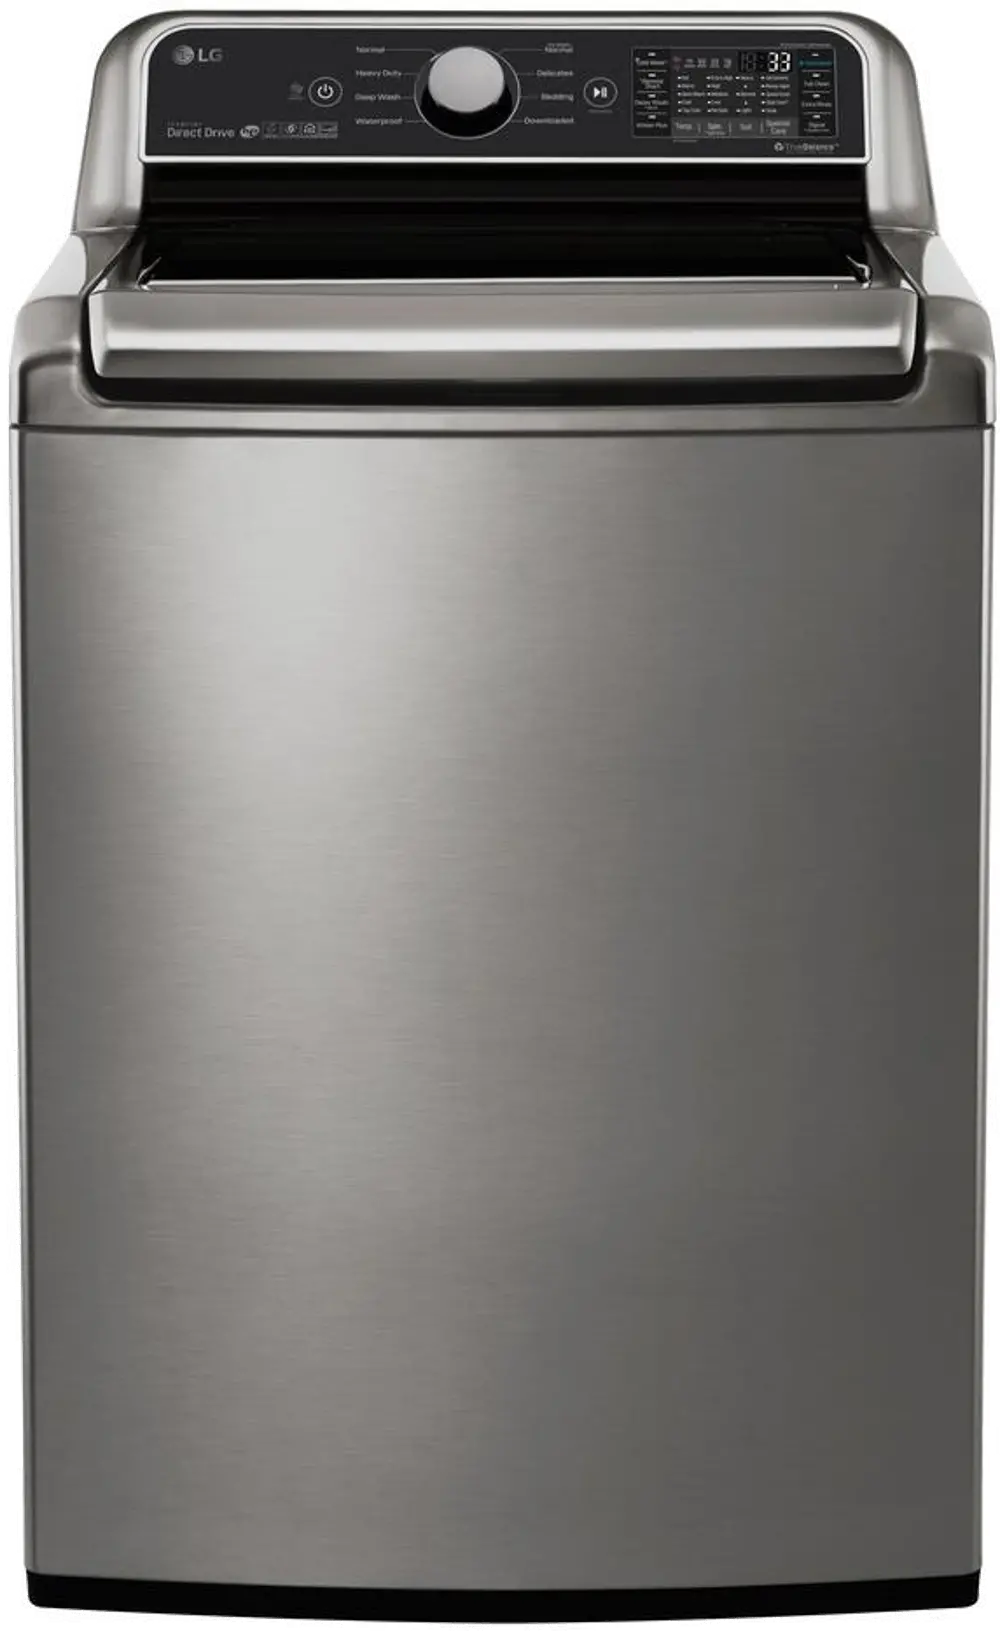 WT7300CV LG 5.0 cu. ft. Top Load Washer with TurboWash - Graphite Steel-1